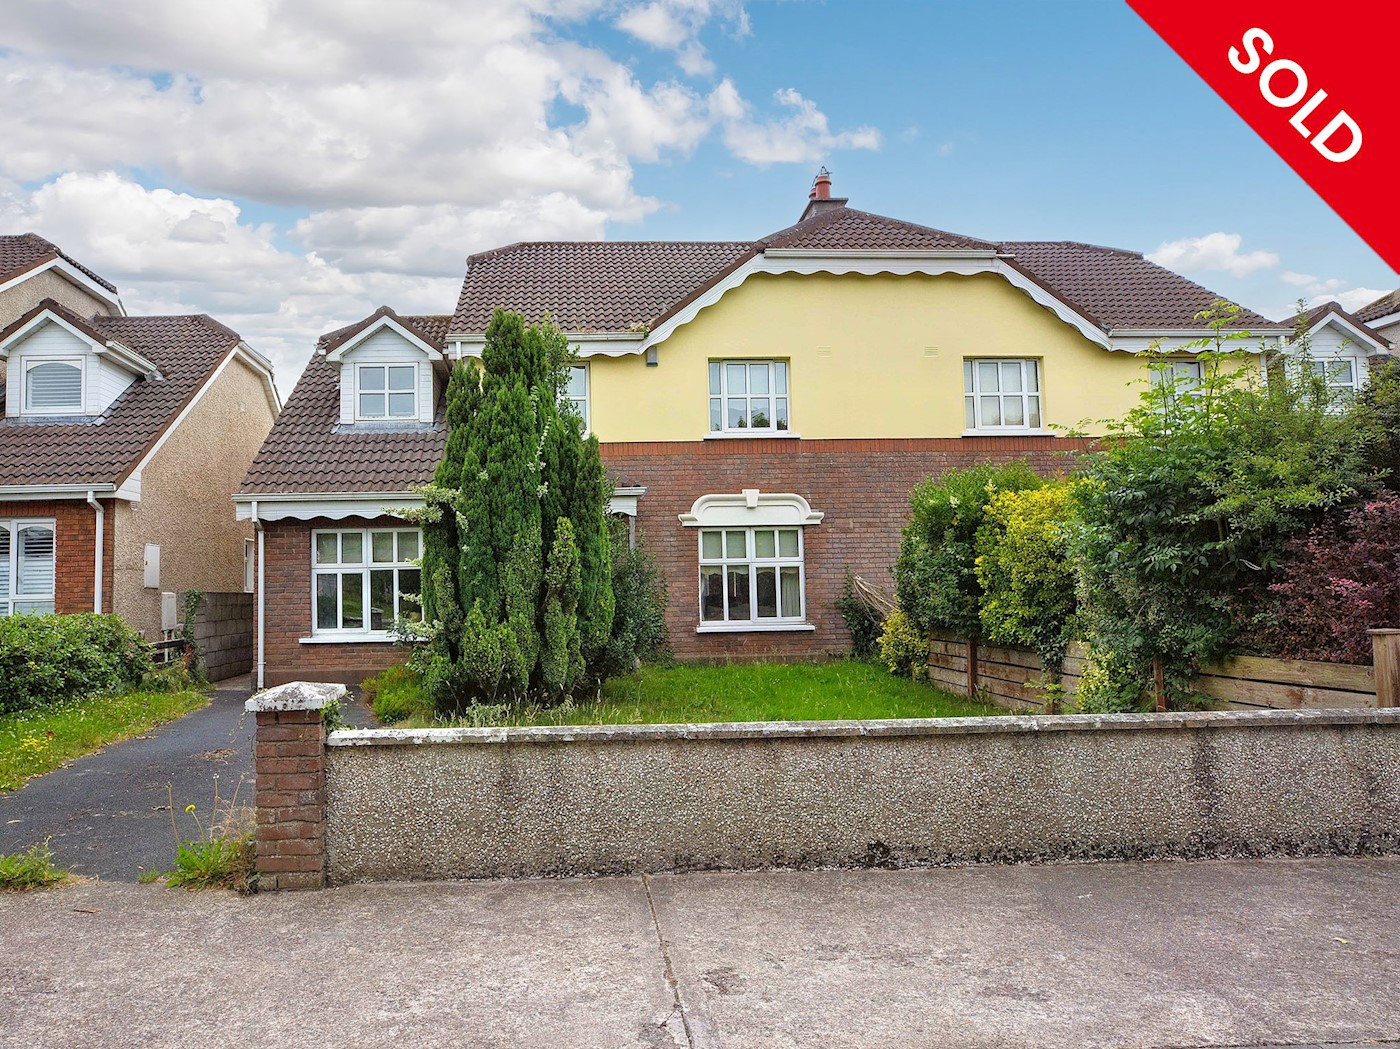 55 Oakfield, Father Russel Road, Raheen, Co. Limerick, V94 TCT8 1/21